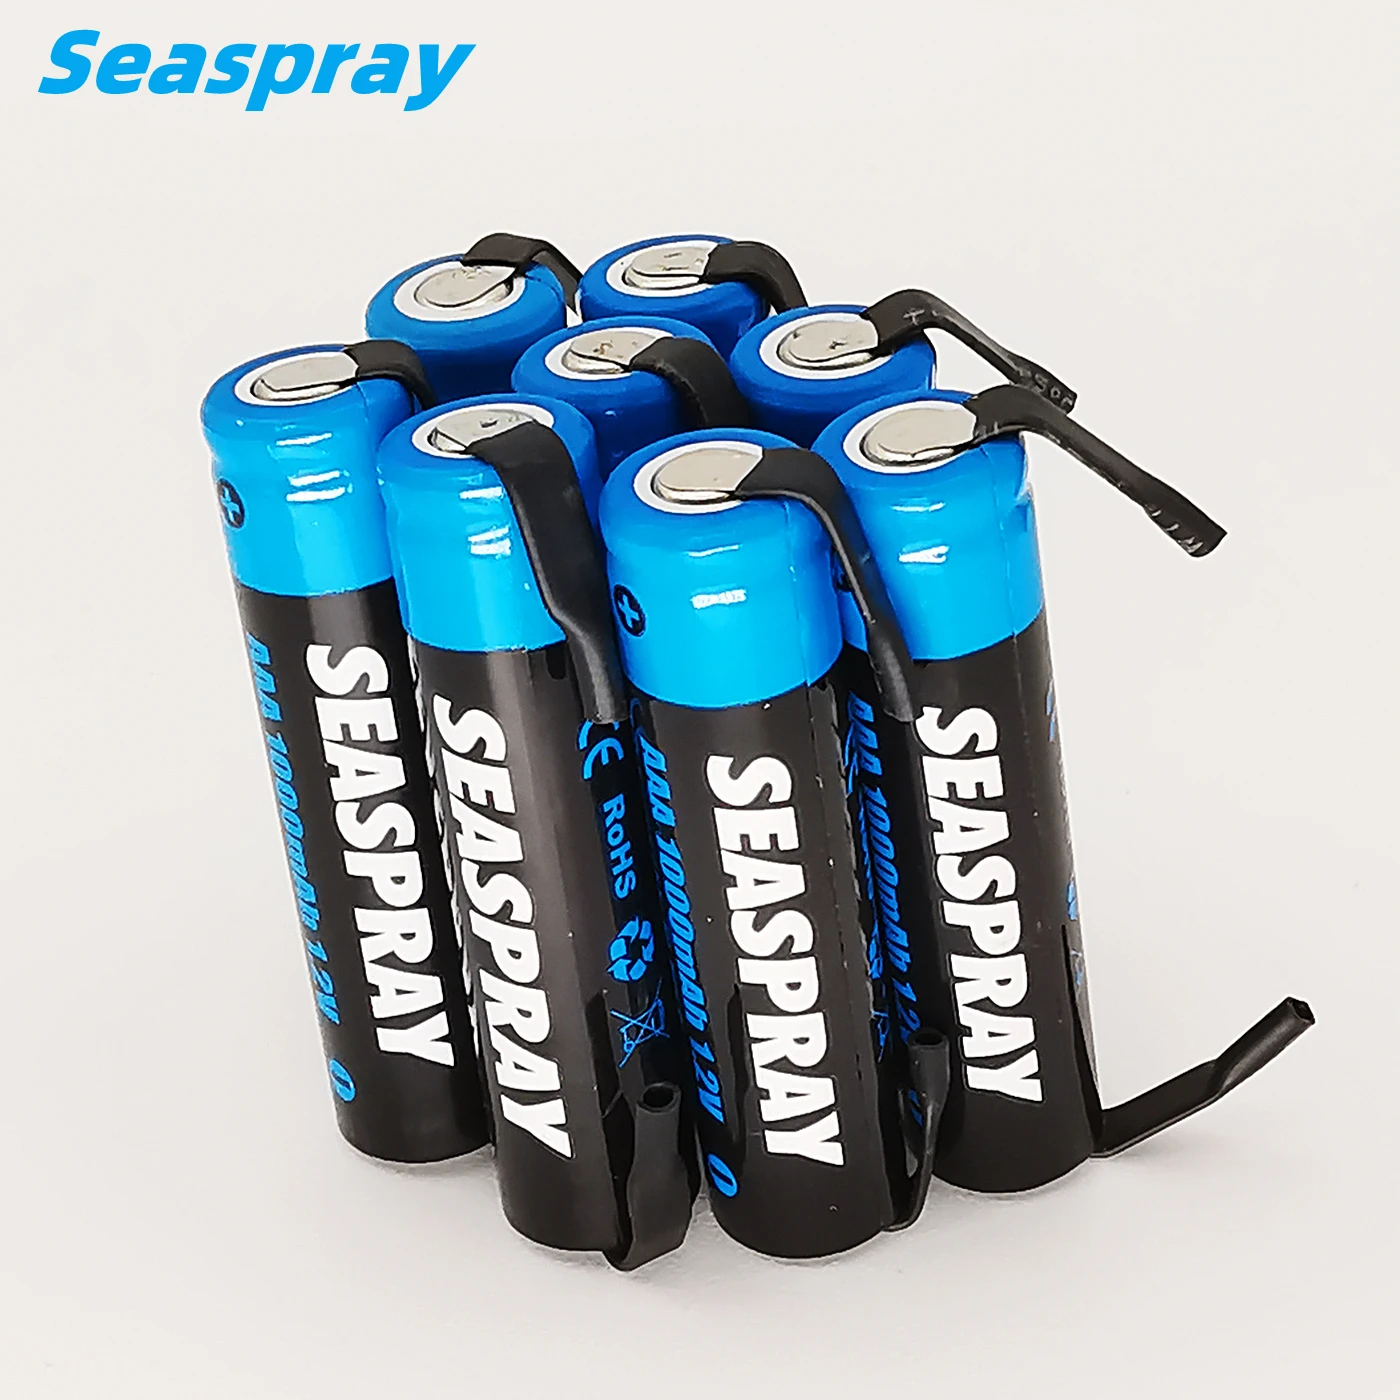 

New 8-pack AAA Rechargeable 1000mAh 1.2V Ni-MH Battery batteries for Flashlight Toys Watch MP3 Player